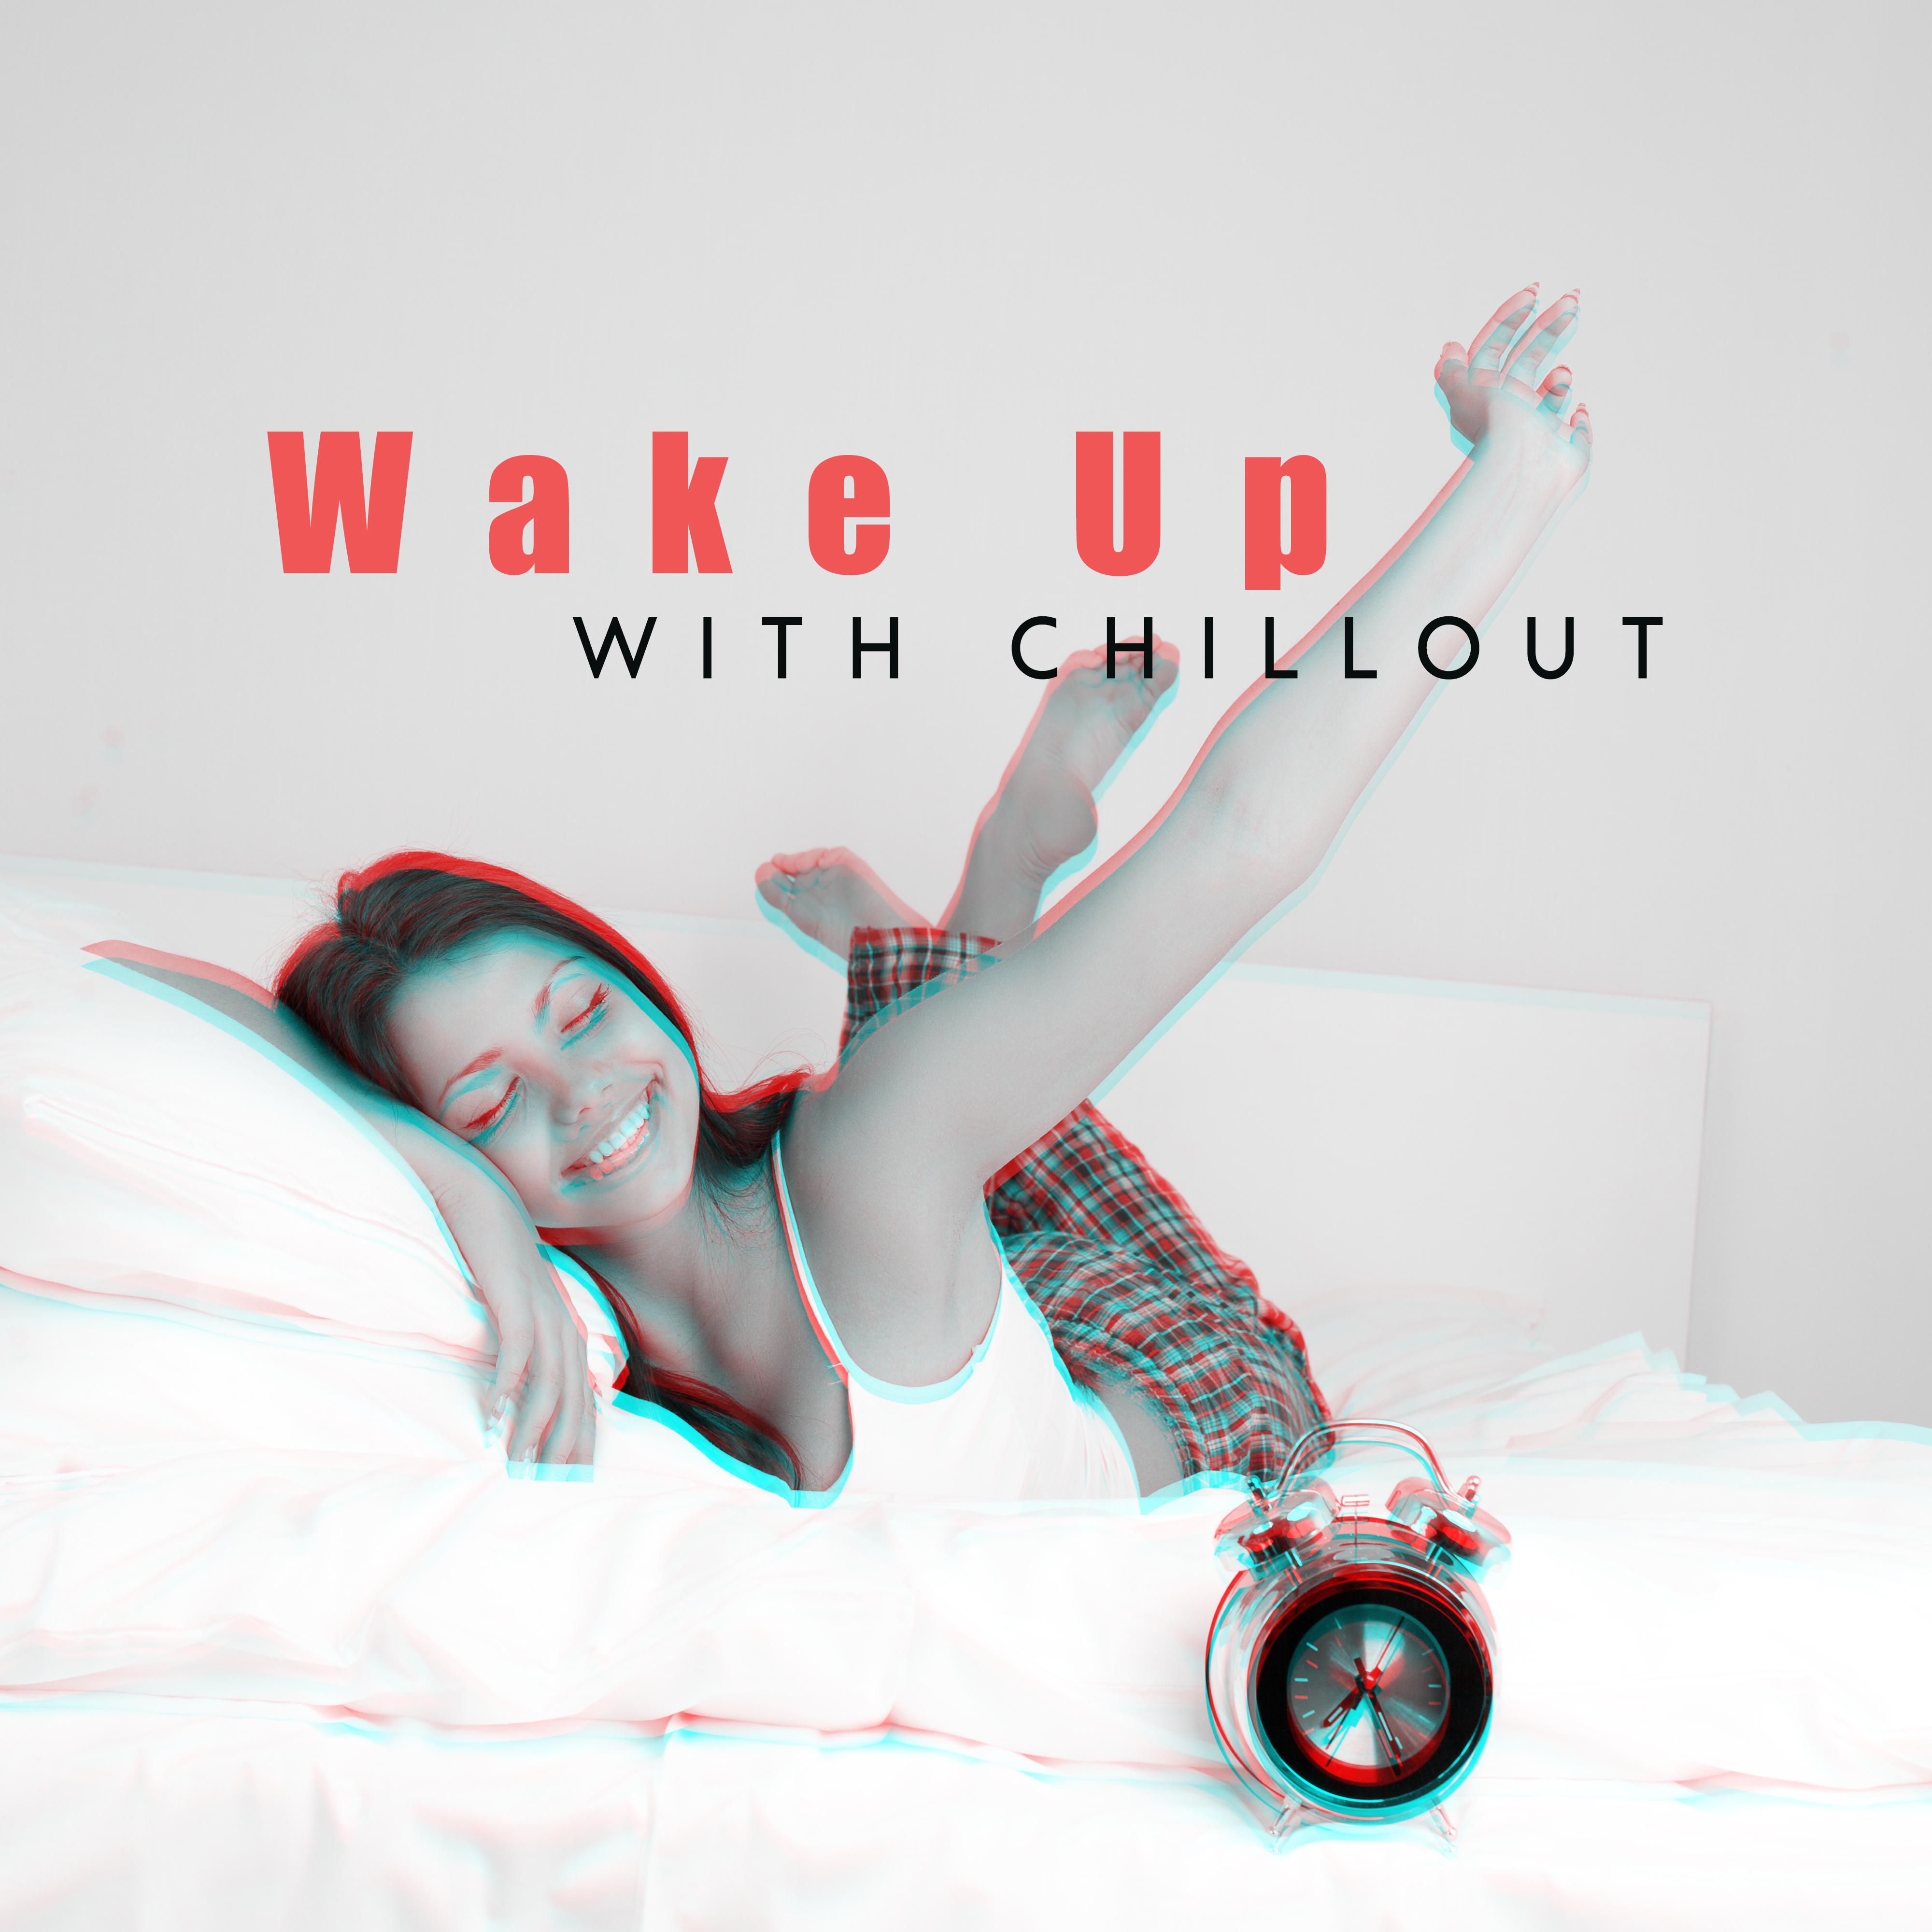 Wake Up With Chillout: Energetic Chillout Beats for a Good Start of the Day!